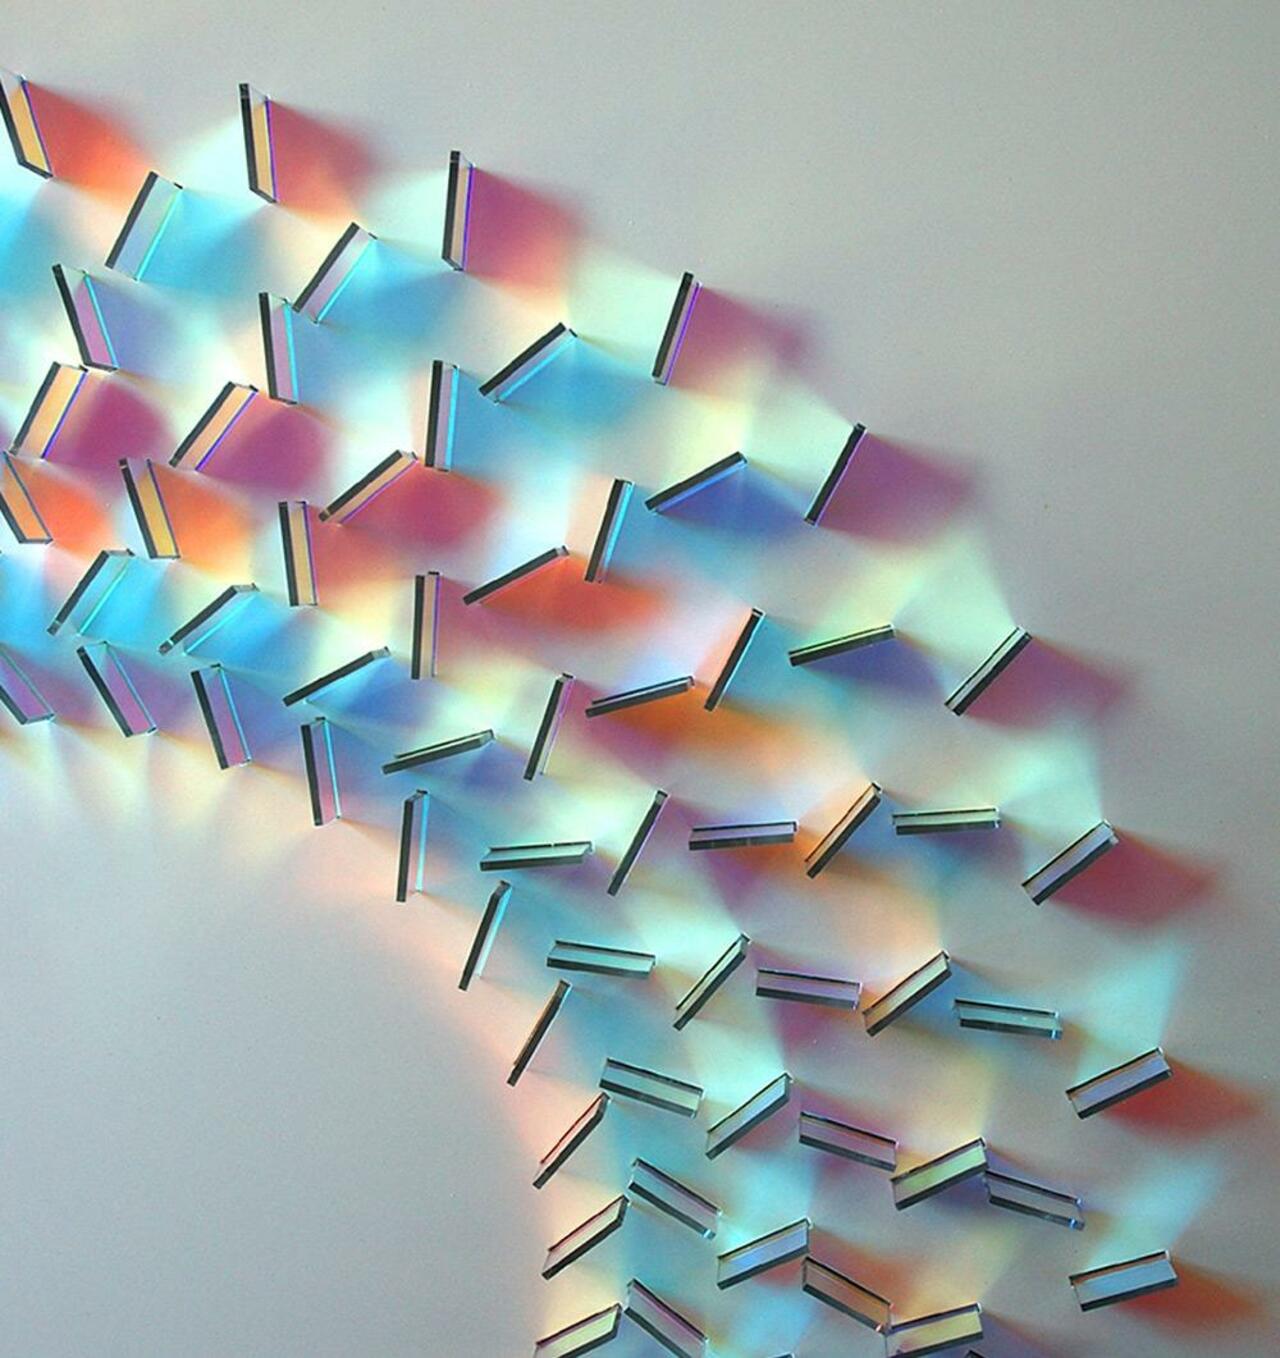 Chris Wood does some incredible things with glass and light. http://www.chriswoodglass.co.uk/ #glass #art #sculpture http://t.co/rRLVUurMG7